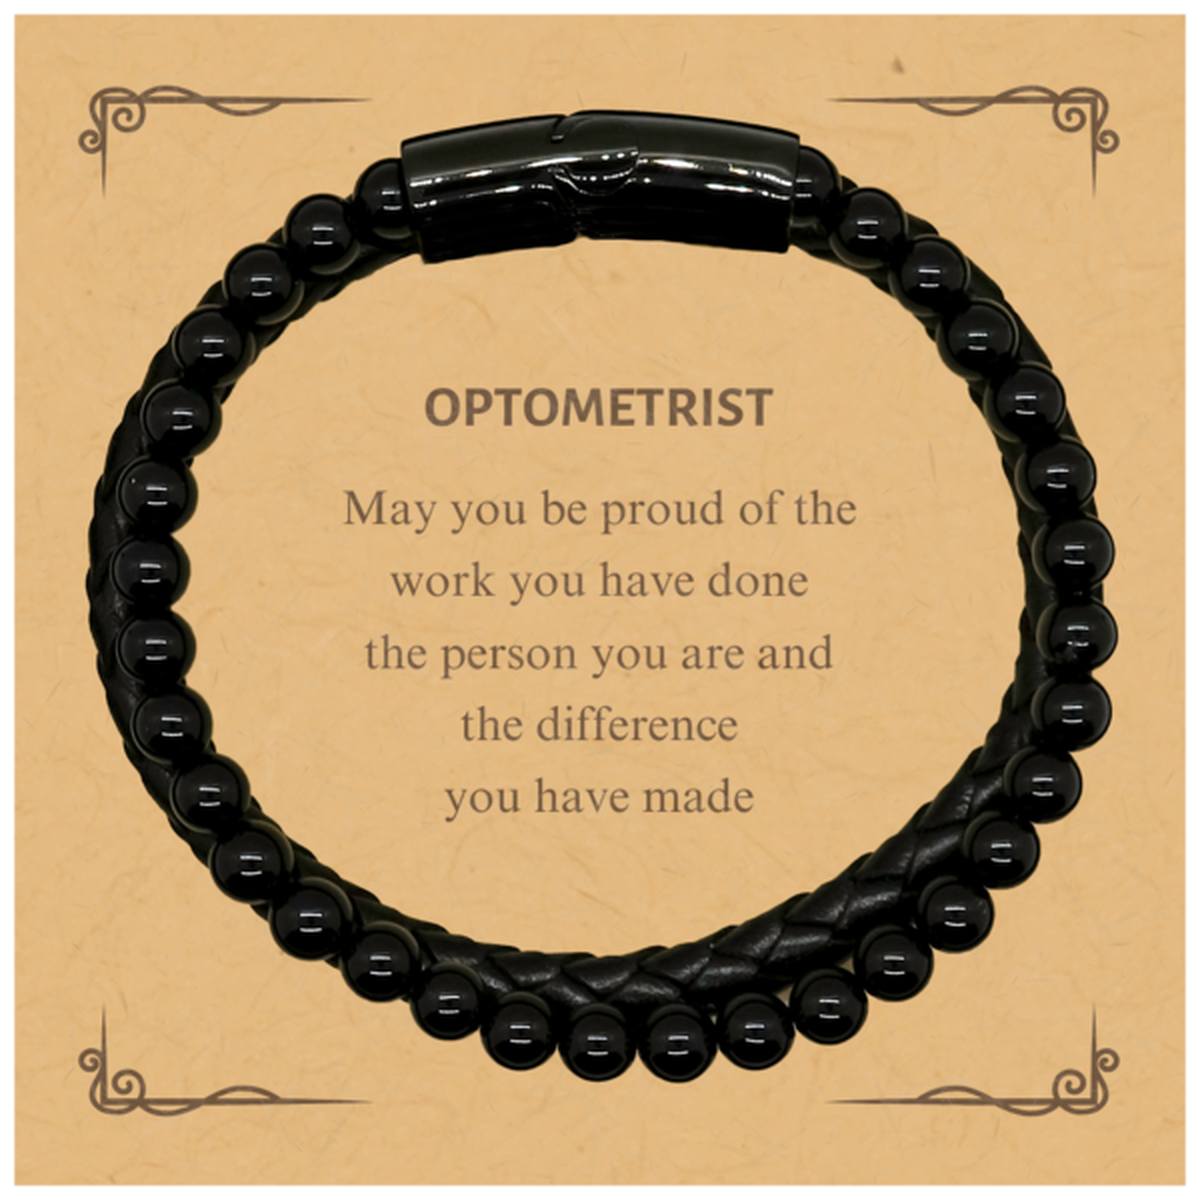 Optometrist May you be proud of the work you have done, Retirement Optometrist Stone Leather Bracelets for Colleague Appreciation Gifts Amazing for Optometrist